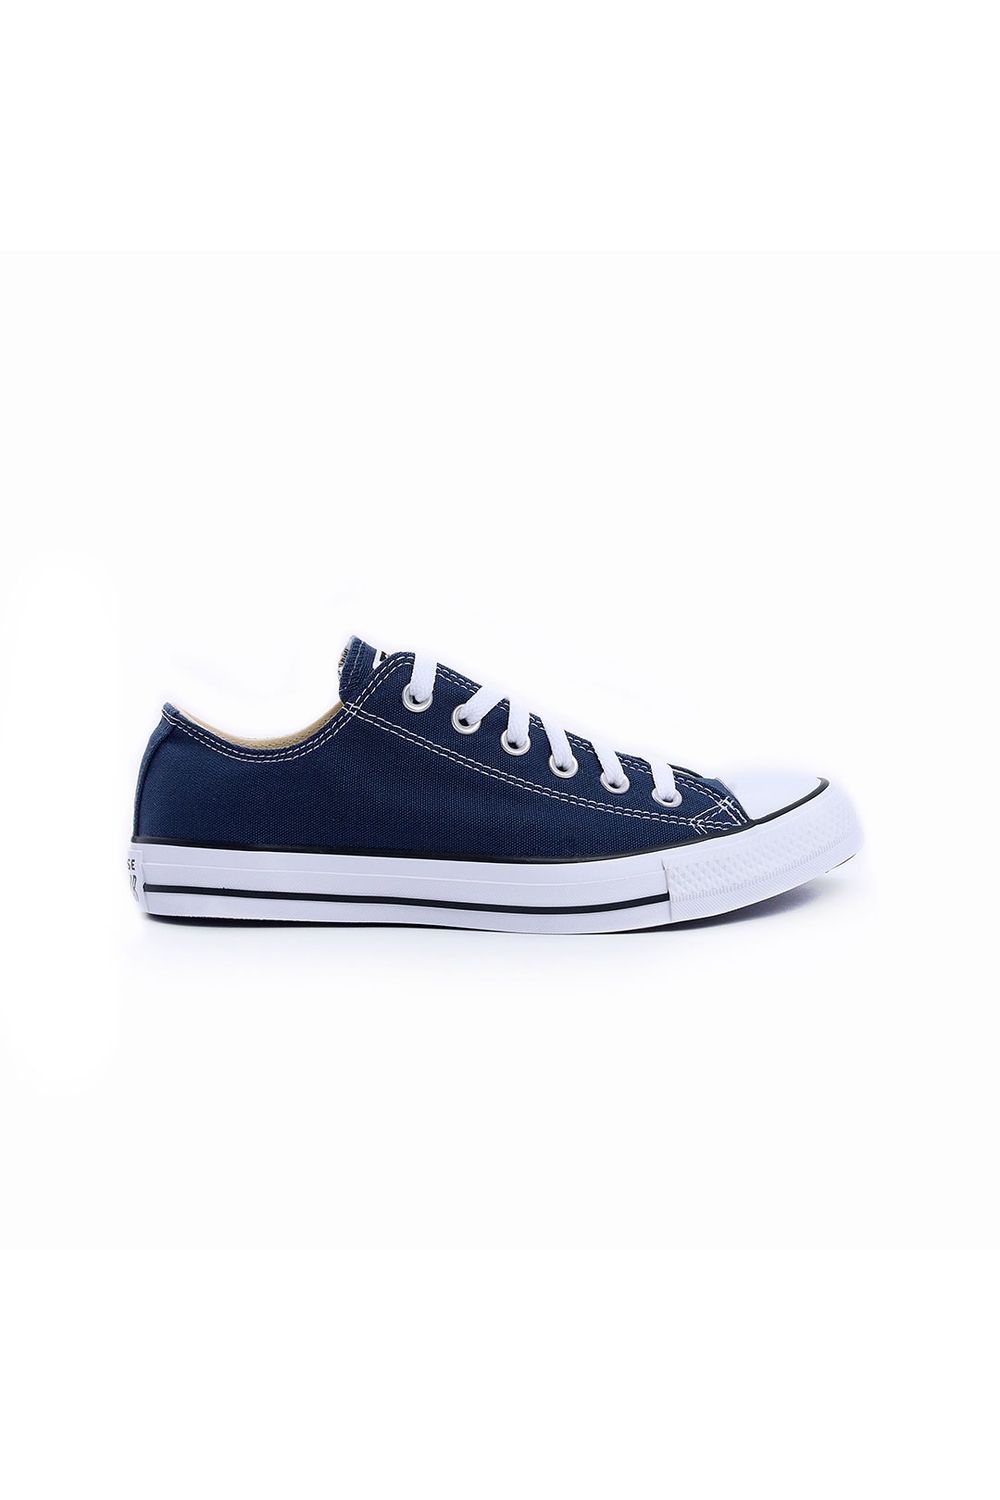 CONVERSE TENIS CASUAL UNISEX ALL STAR OX